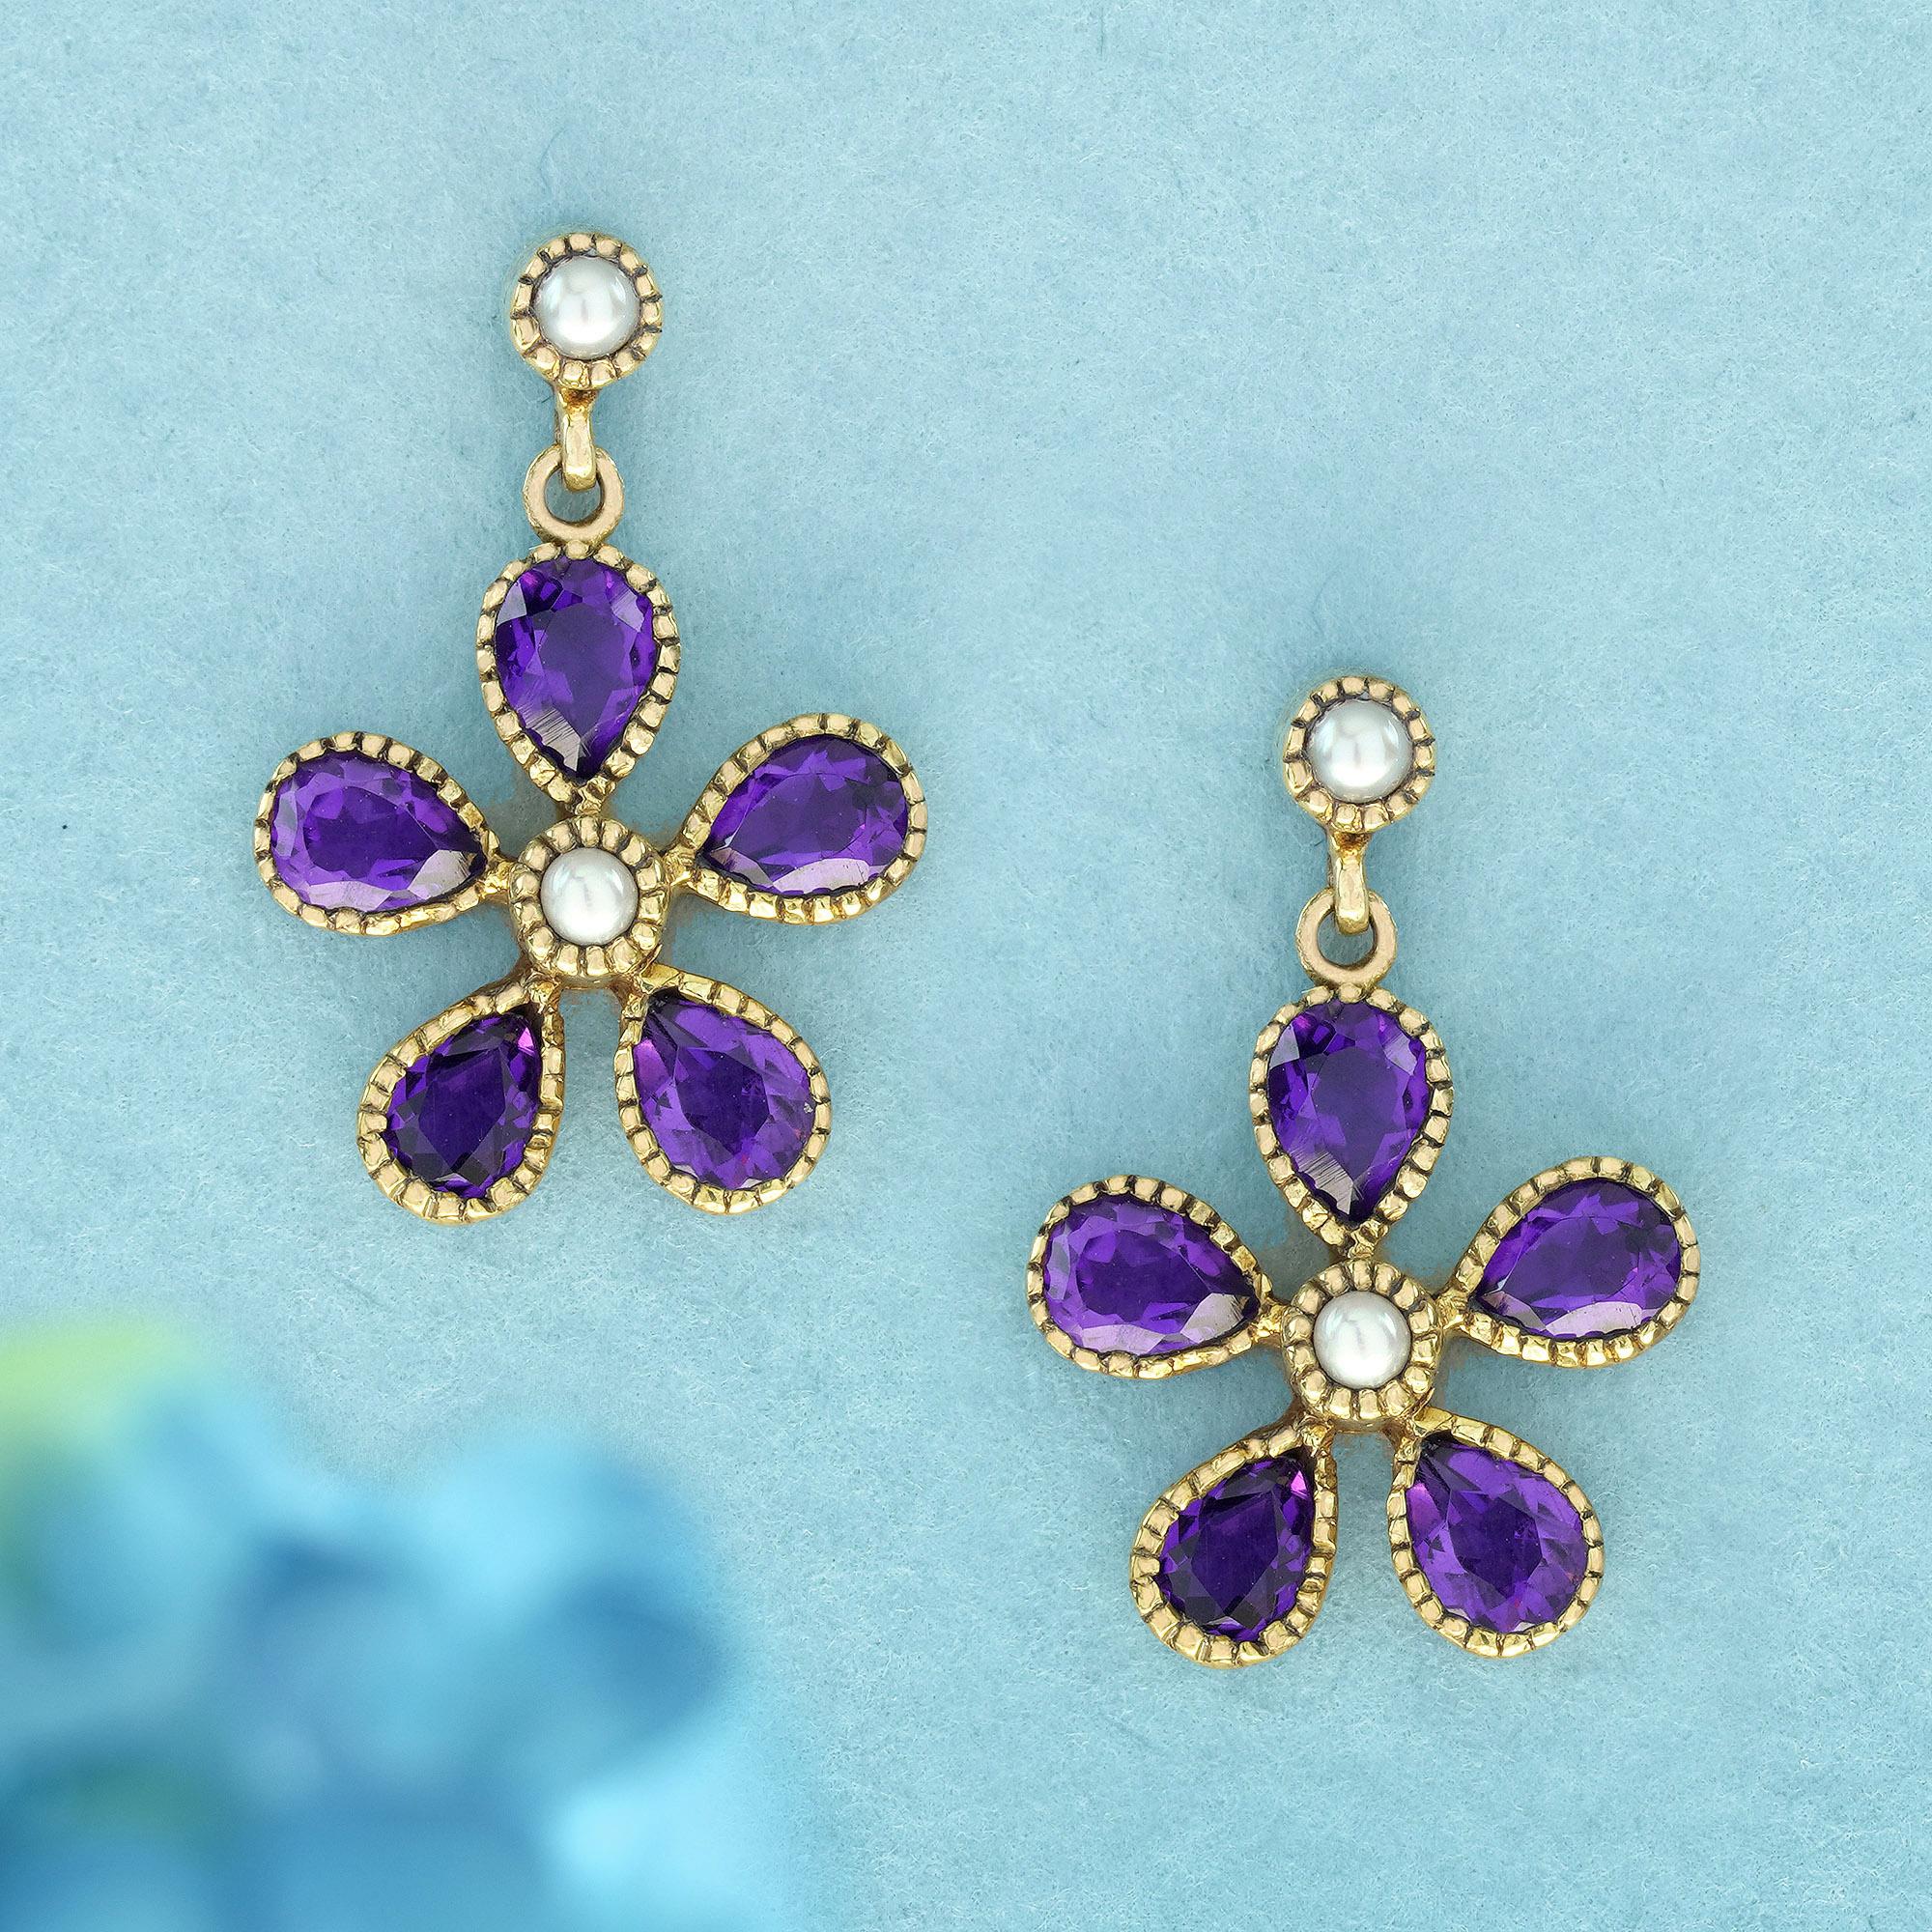 These vintage-inspired earrings boast a floral design, showcasing four pear-shaped purple petals crafted from amethysts in a yellow gold migraine work, with a round white pearl at their center resembling pollen. The timeless combination of amethyst